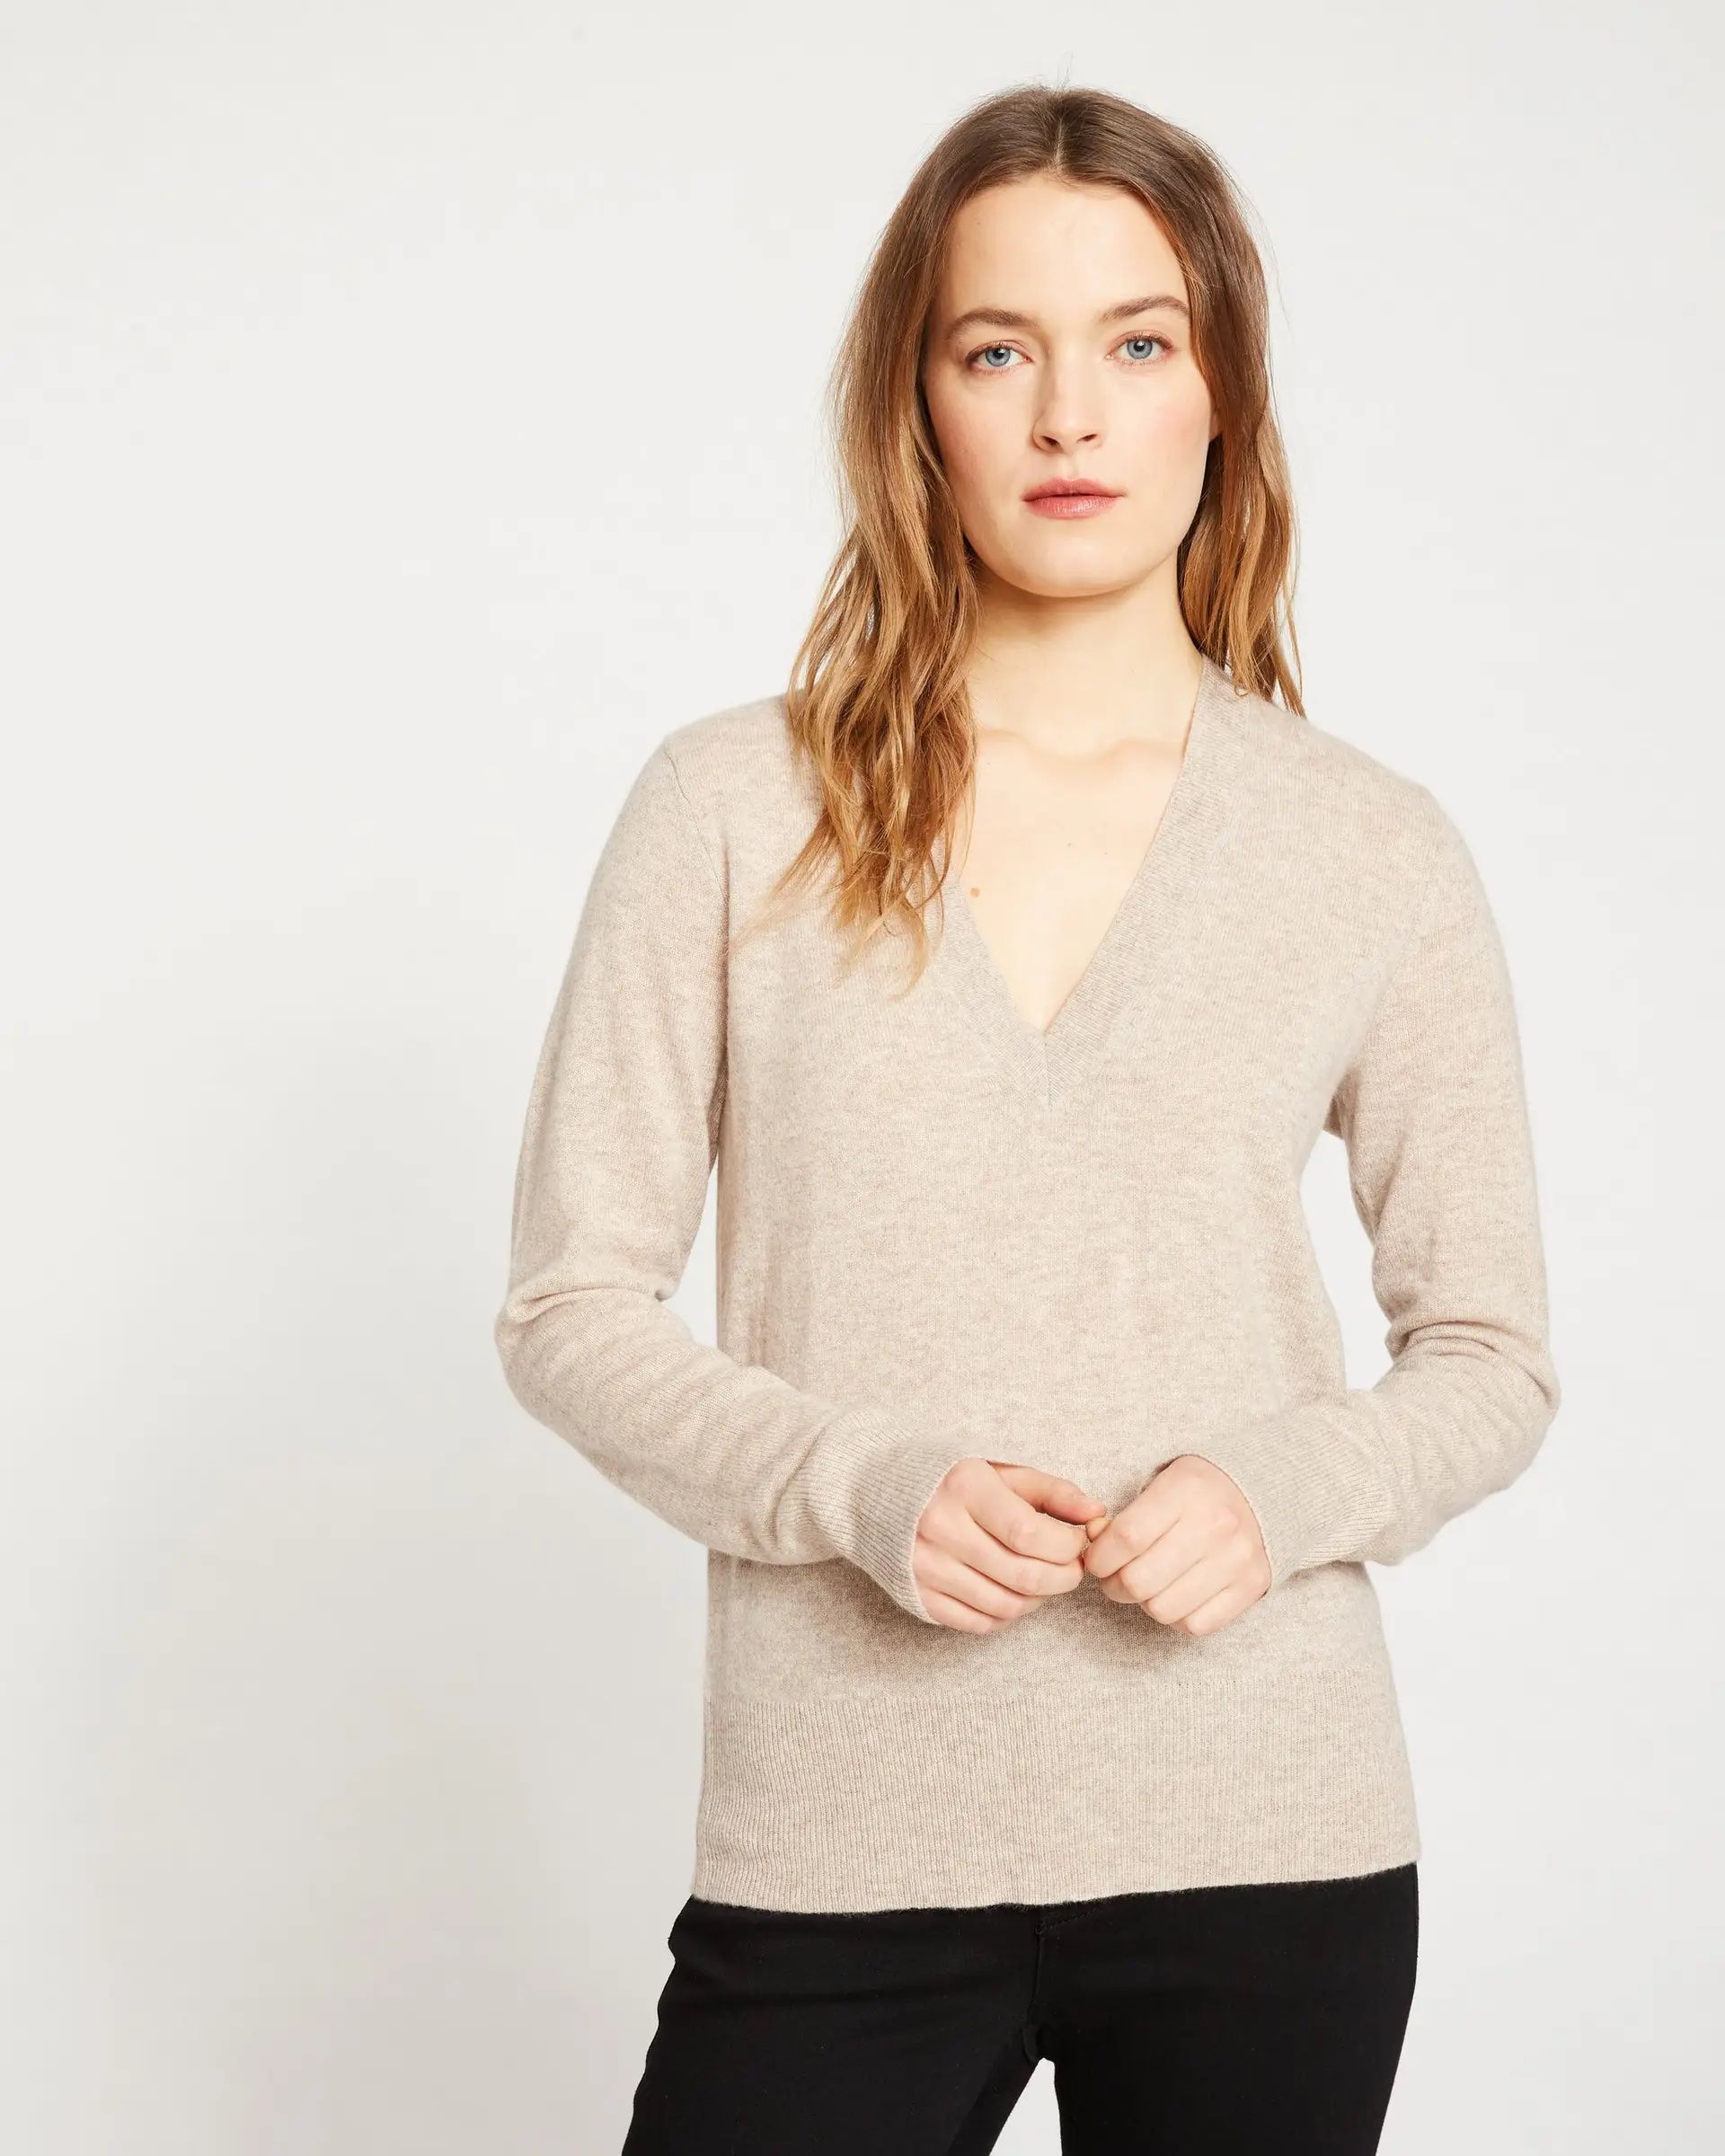 13 Best Cashmere Sweaters for Women 2022 | The Strategist